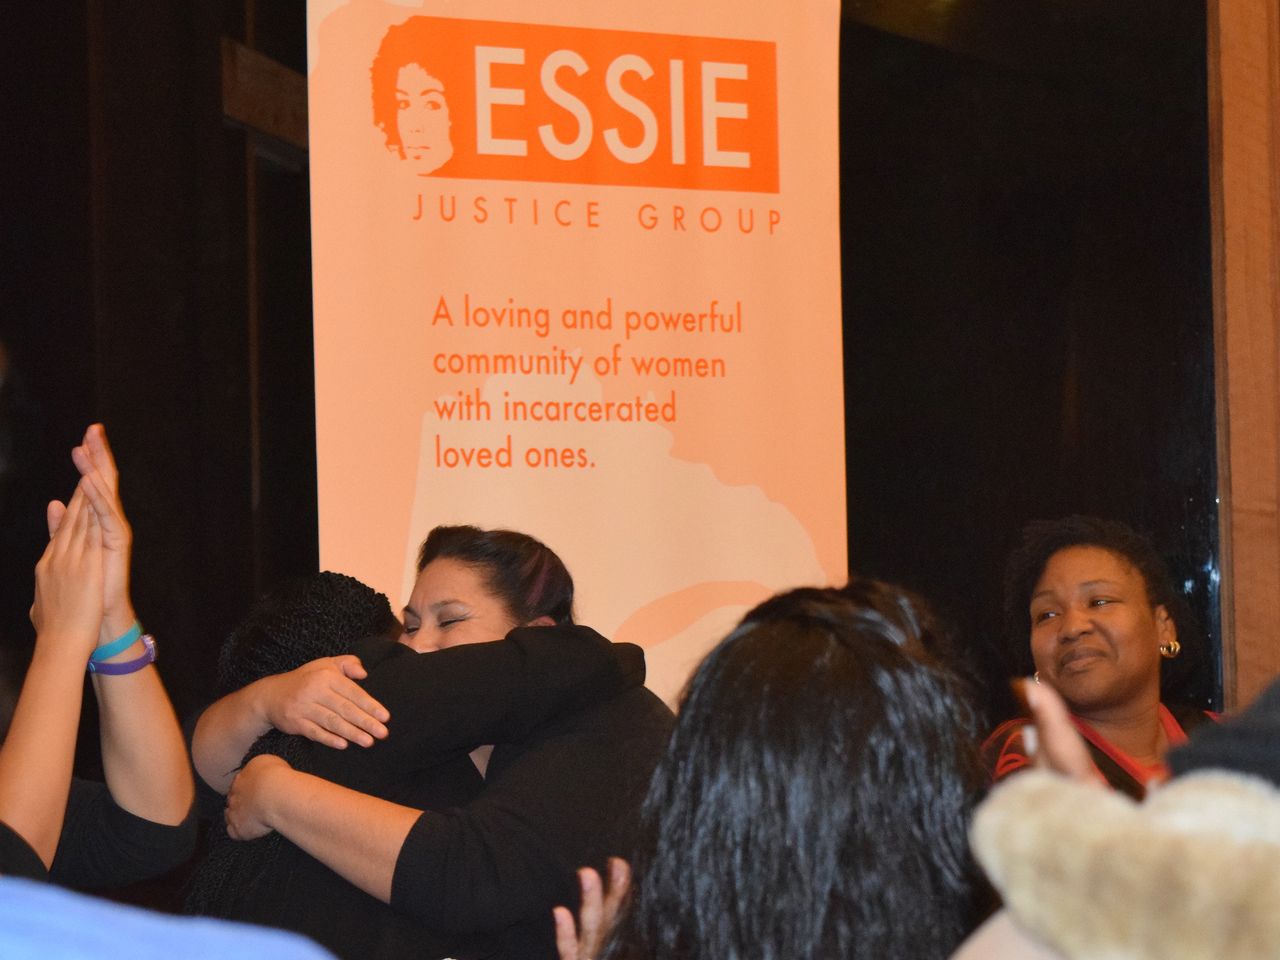 Essie members embrace at an event in January 2016.